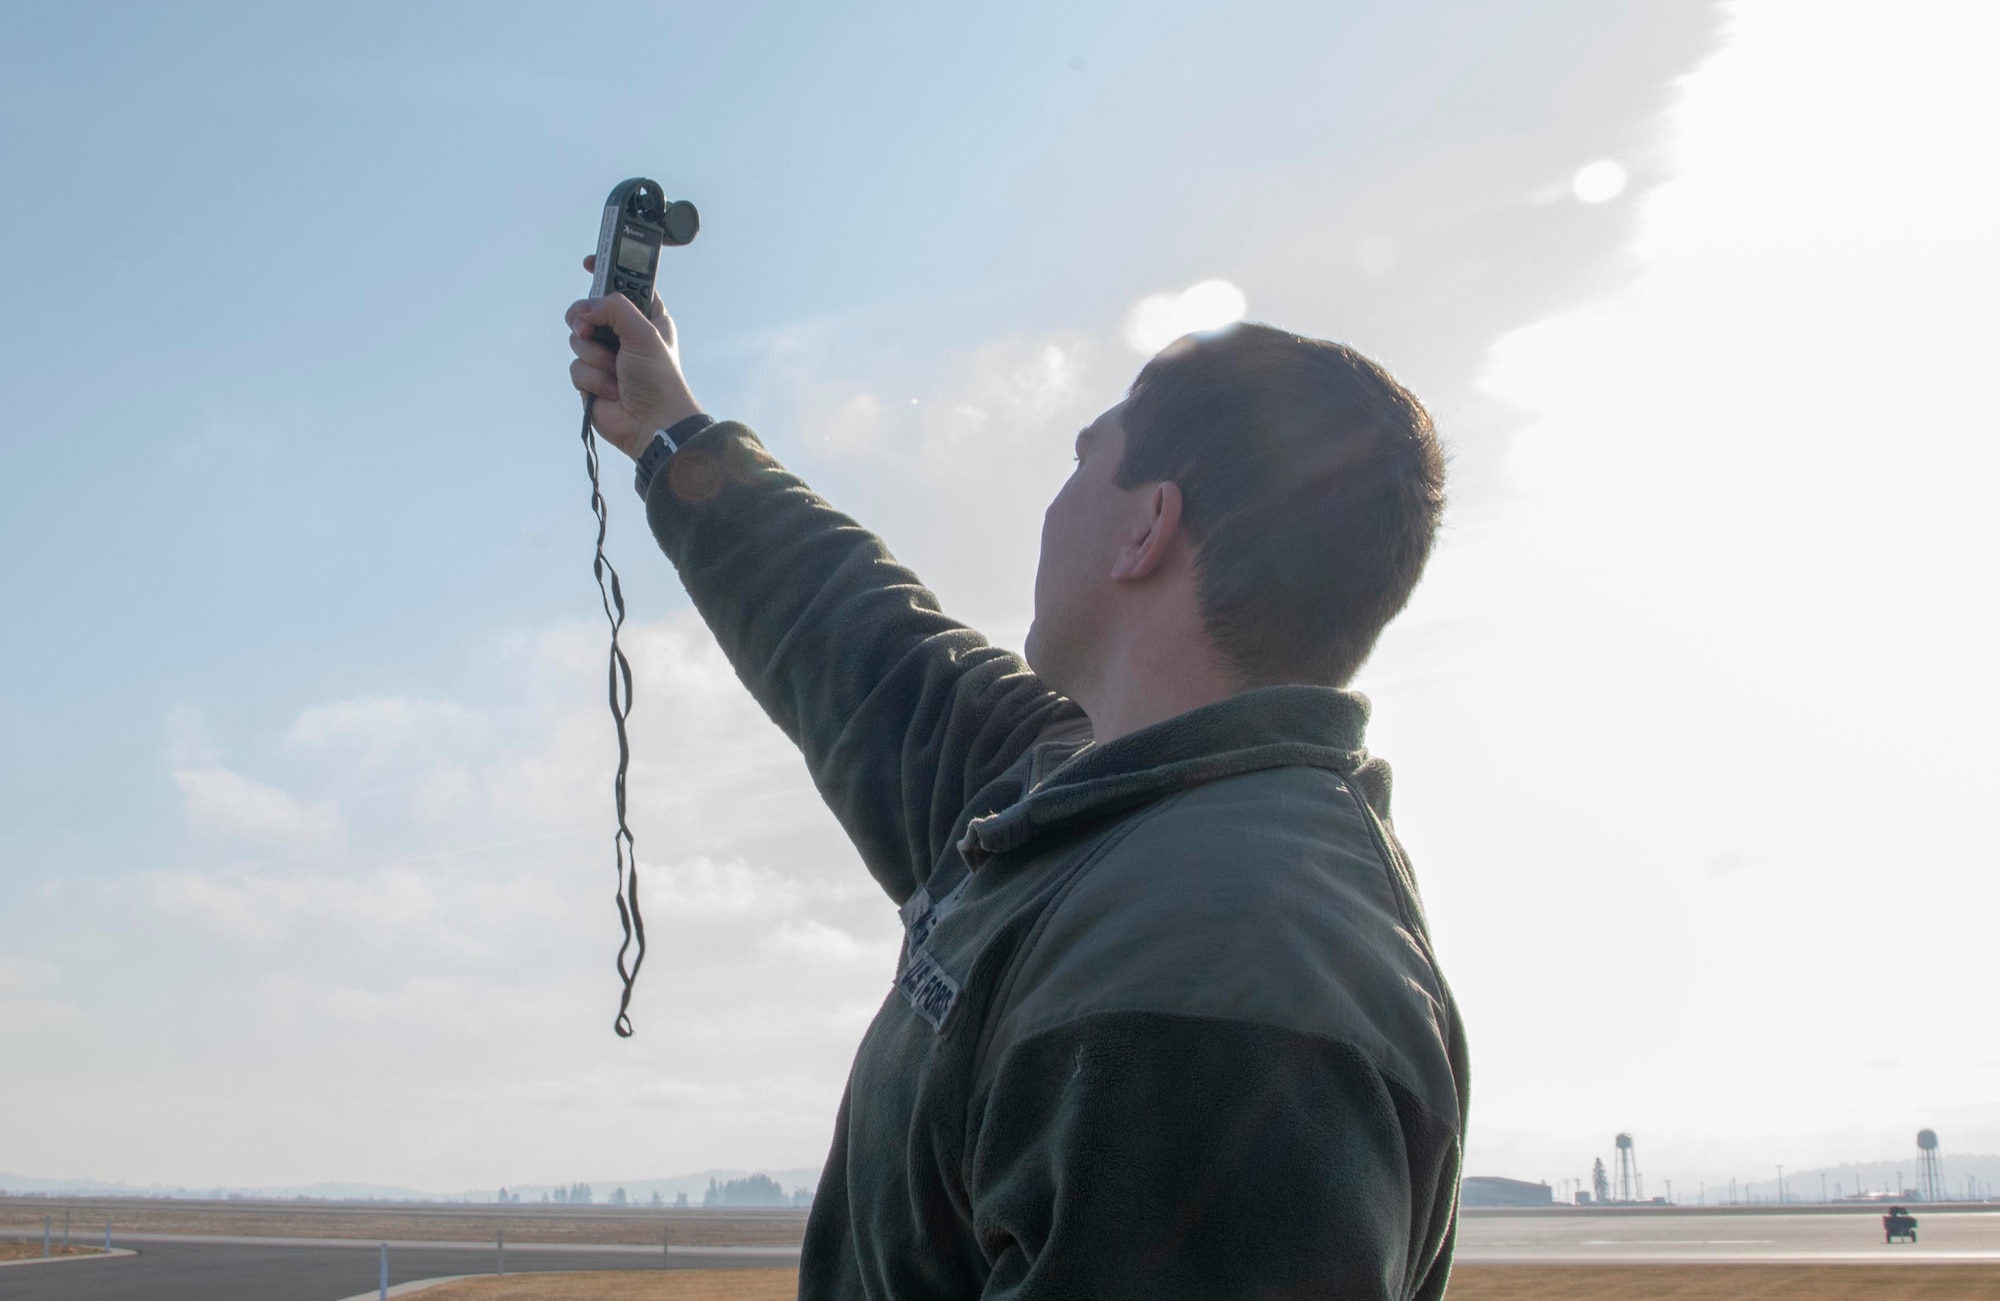 U.S. Air Force Tech Sgt. Johnny McGuire, 92nd Operational Support Squadron weather forecaster, uses a Kestrel device to gather an hourly record of weather data at Fairchild Air Force Base, Washington, Nov. 14, 2019.